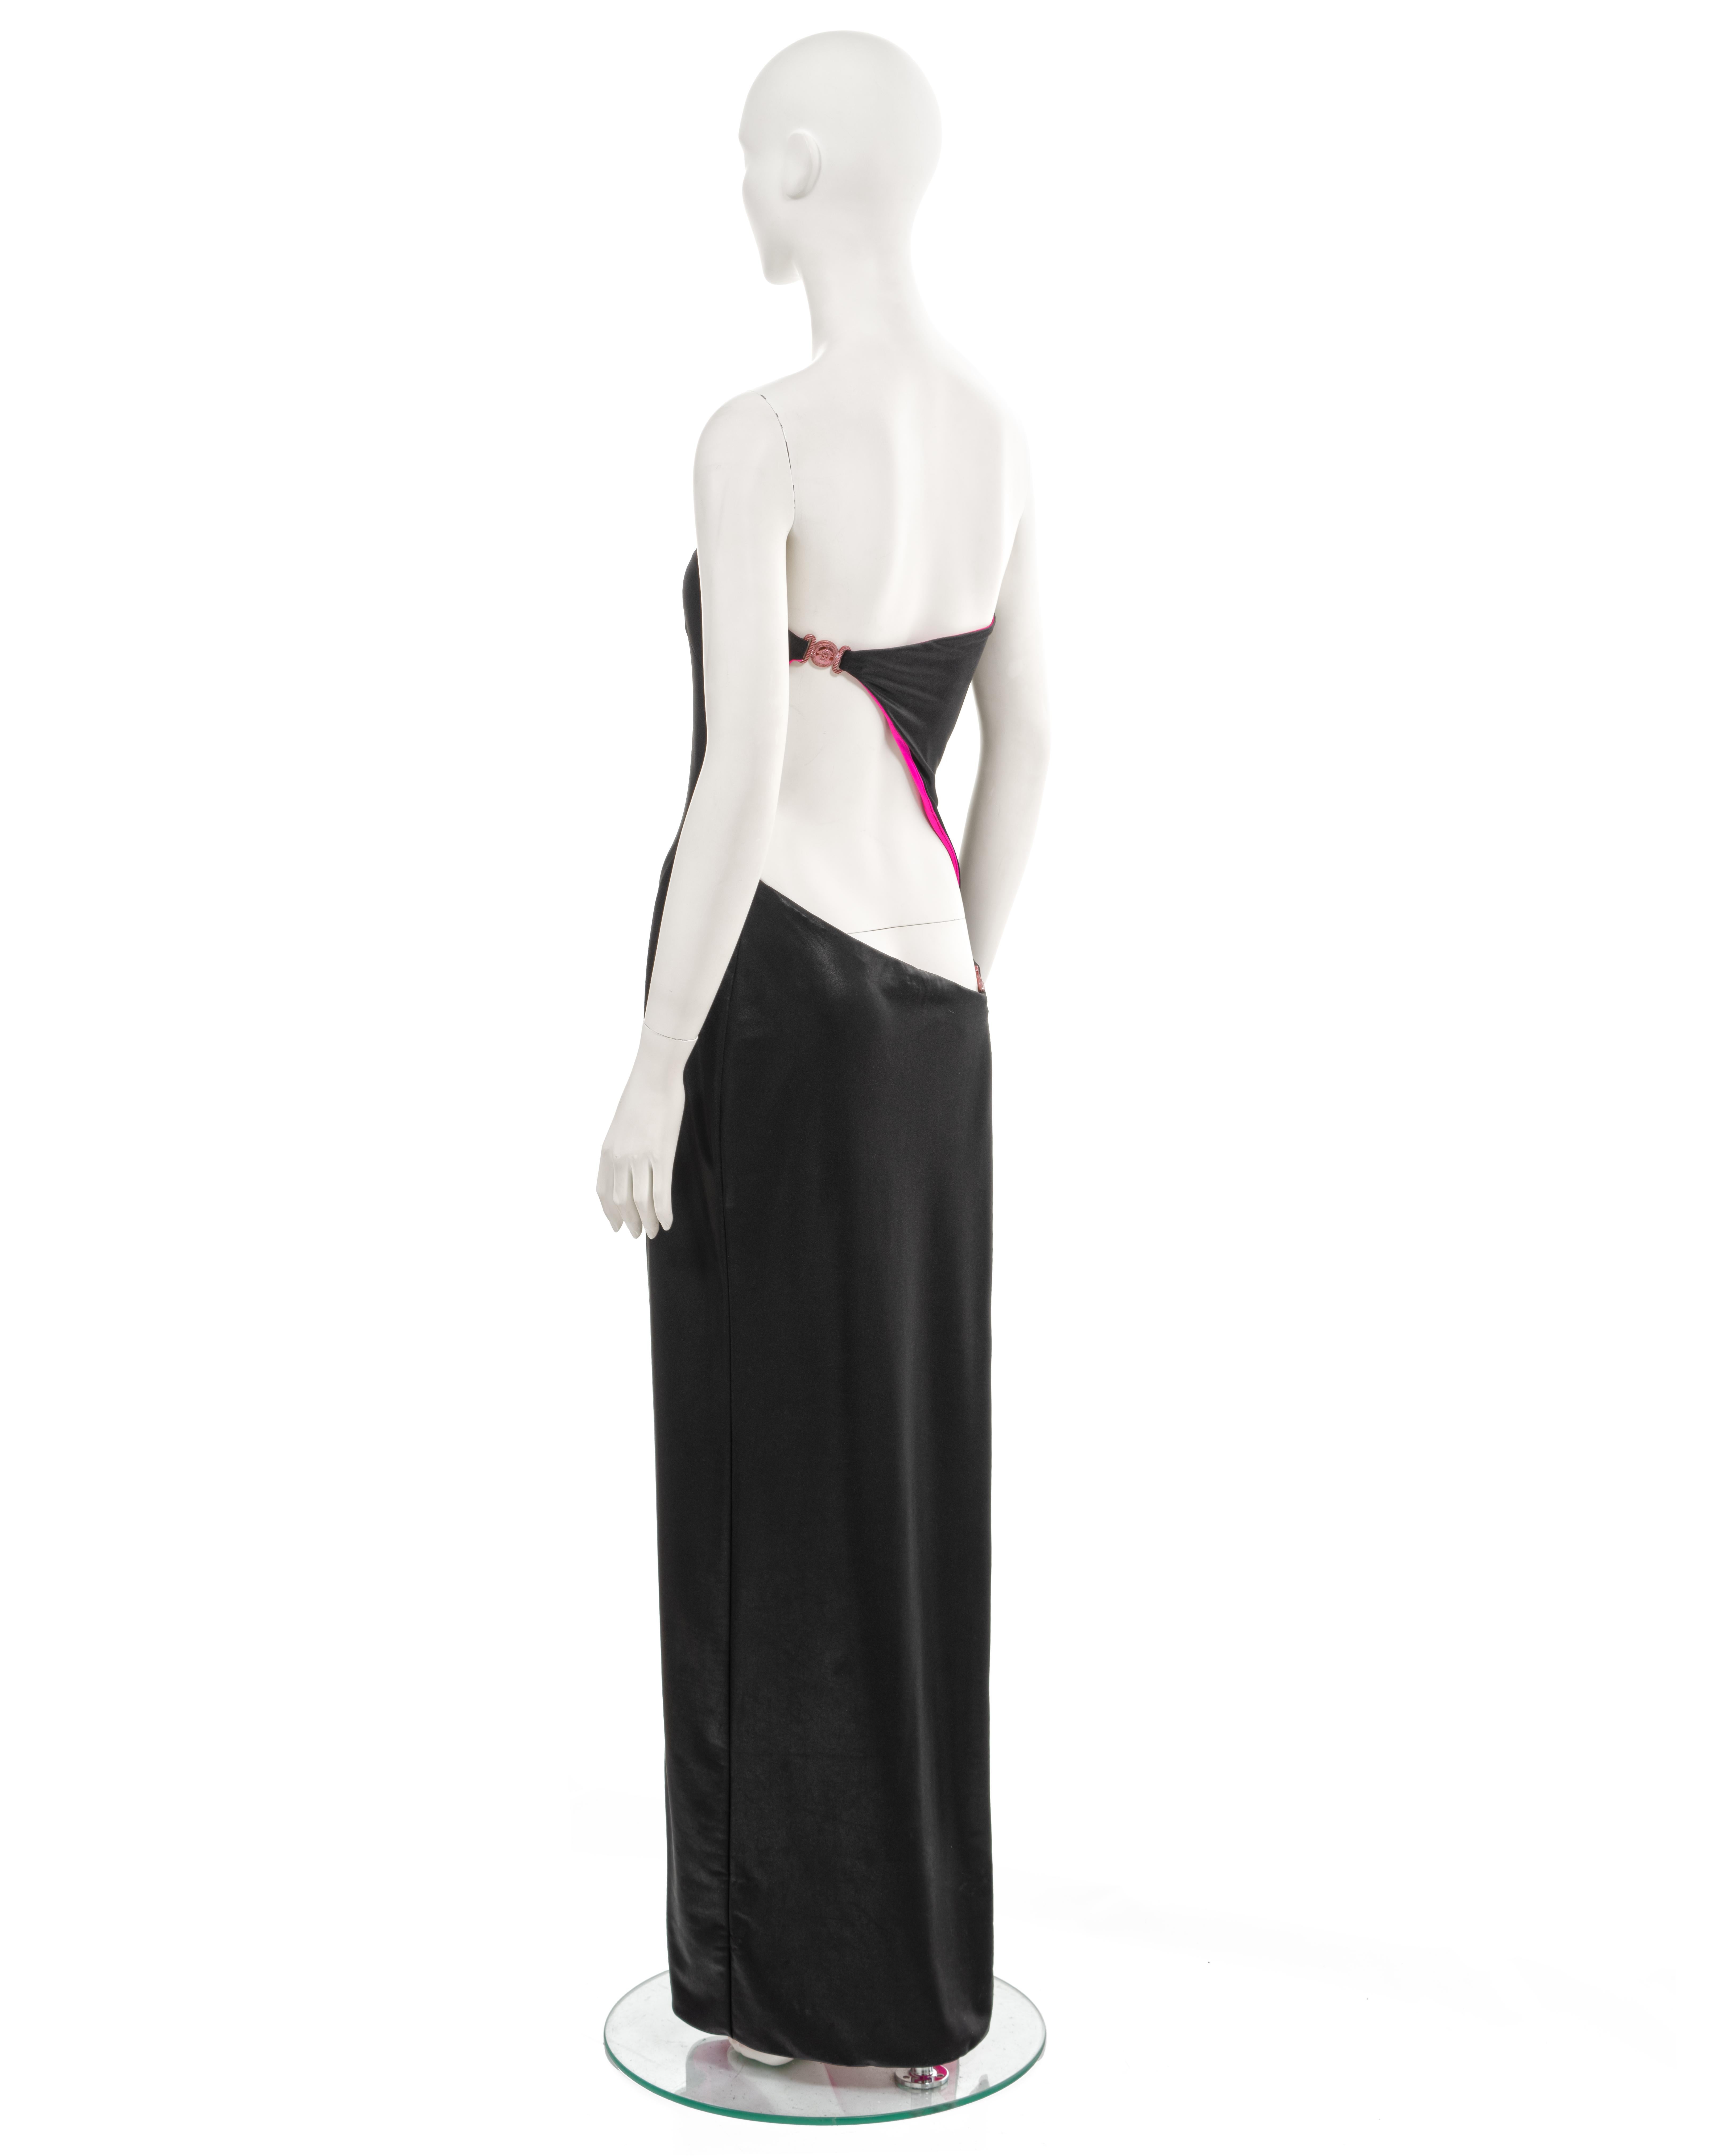 Gianni Versace black wet-look strapless evening dress with cut outs, ss 1998 For Sale 10